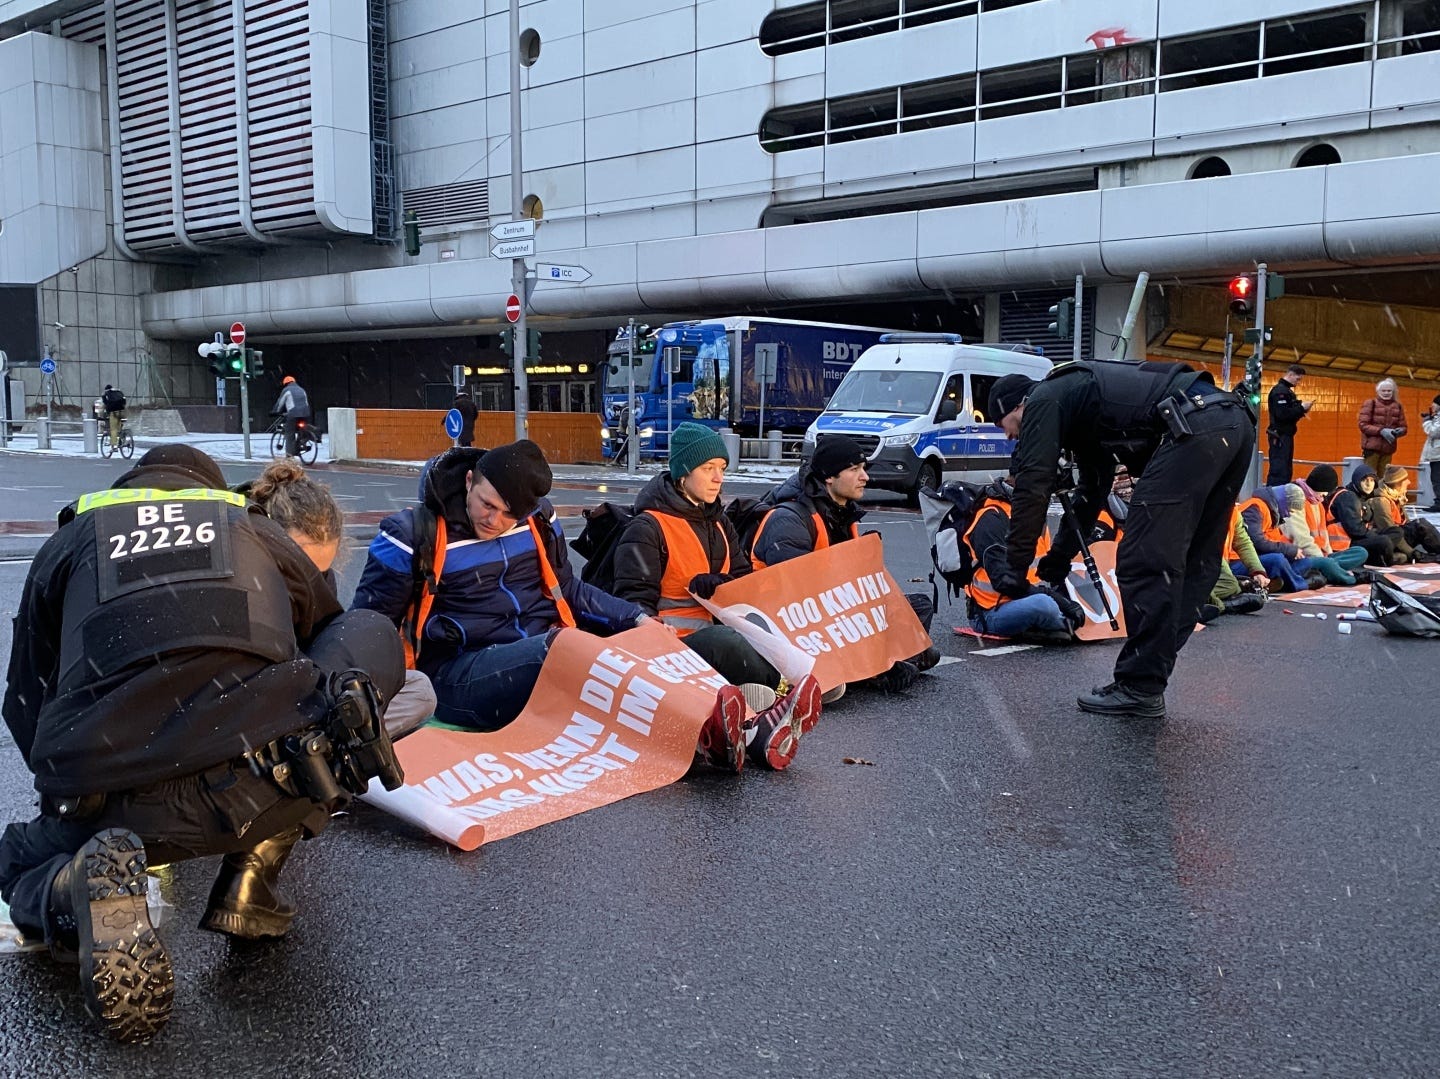 Climate activists from the group Letzte Generation (Last Generation) hold up commuter traffic on a Monday morning in Berlin by supergluing themselves to the road. Police unstick their hands using cooking oil and a pastry brush while irate drivers look on, stuck for more than an hour.